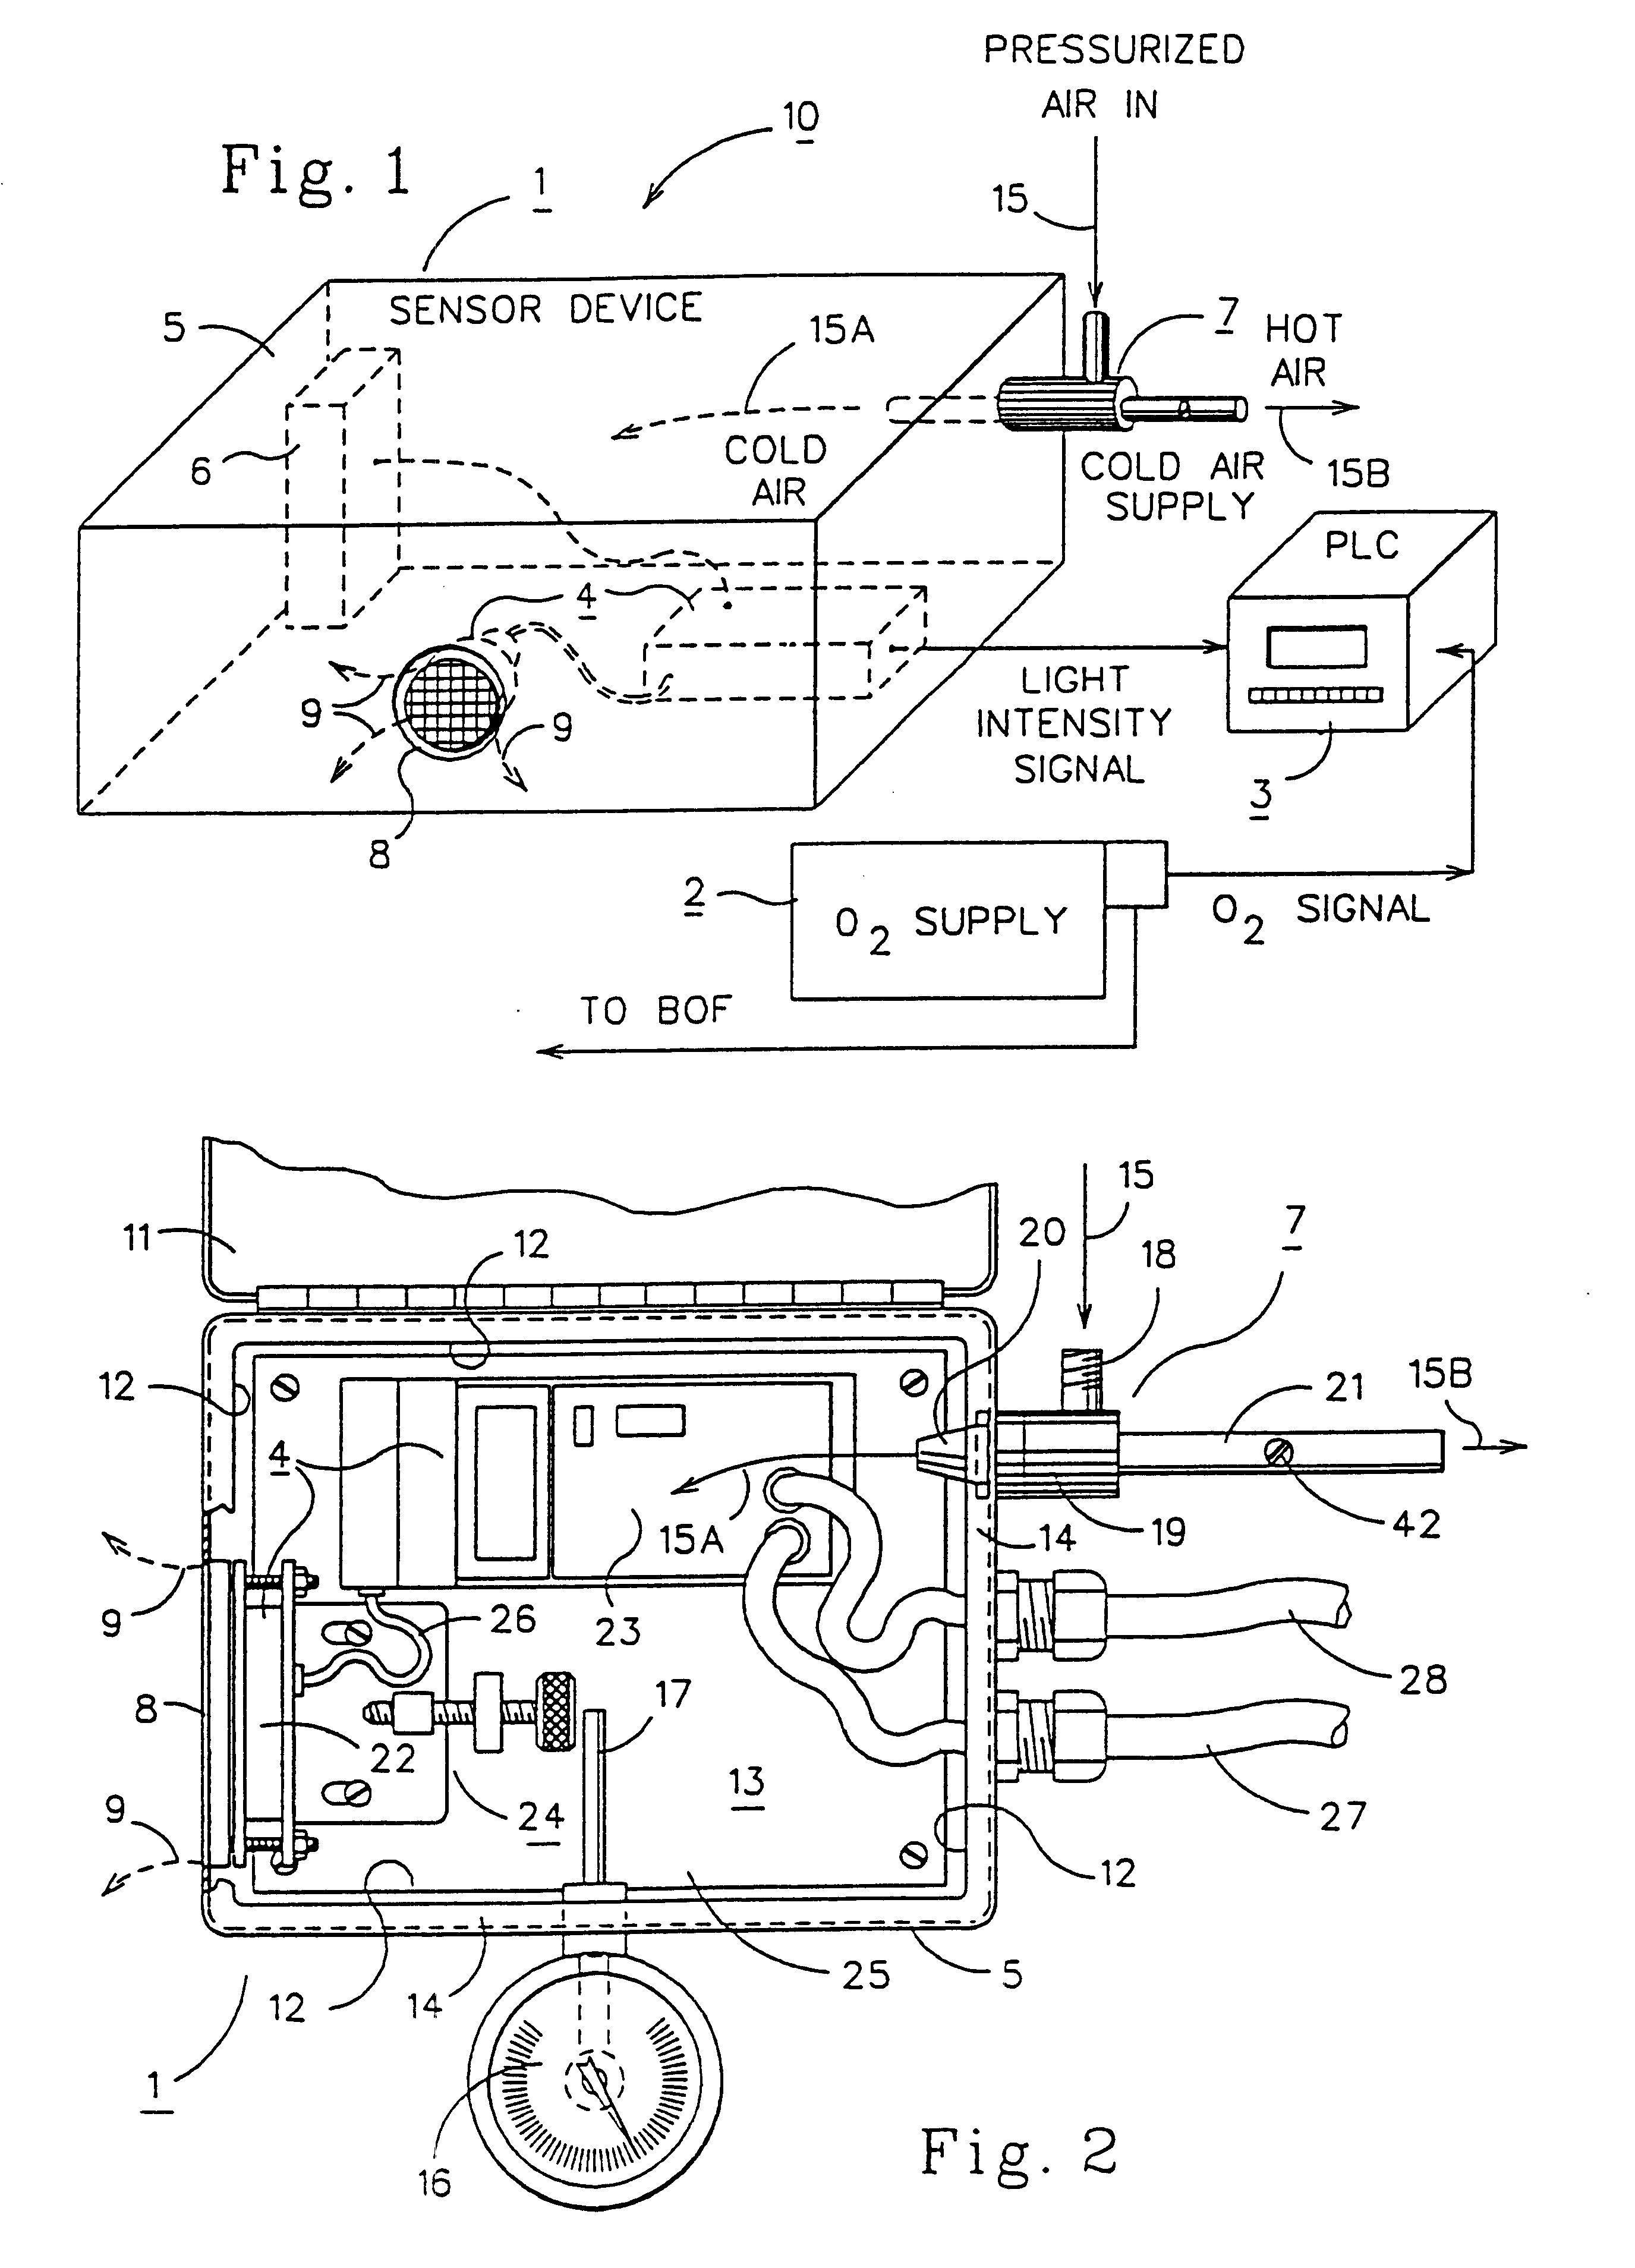 Method and apparatus to determine and control the carbon content of steel in a BOF vessel